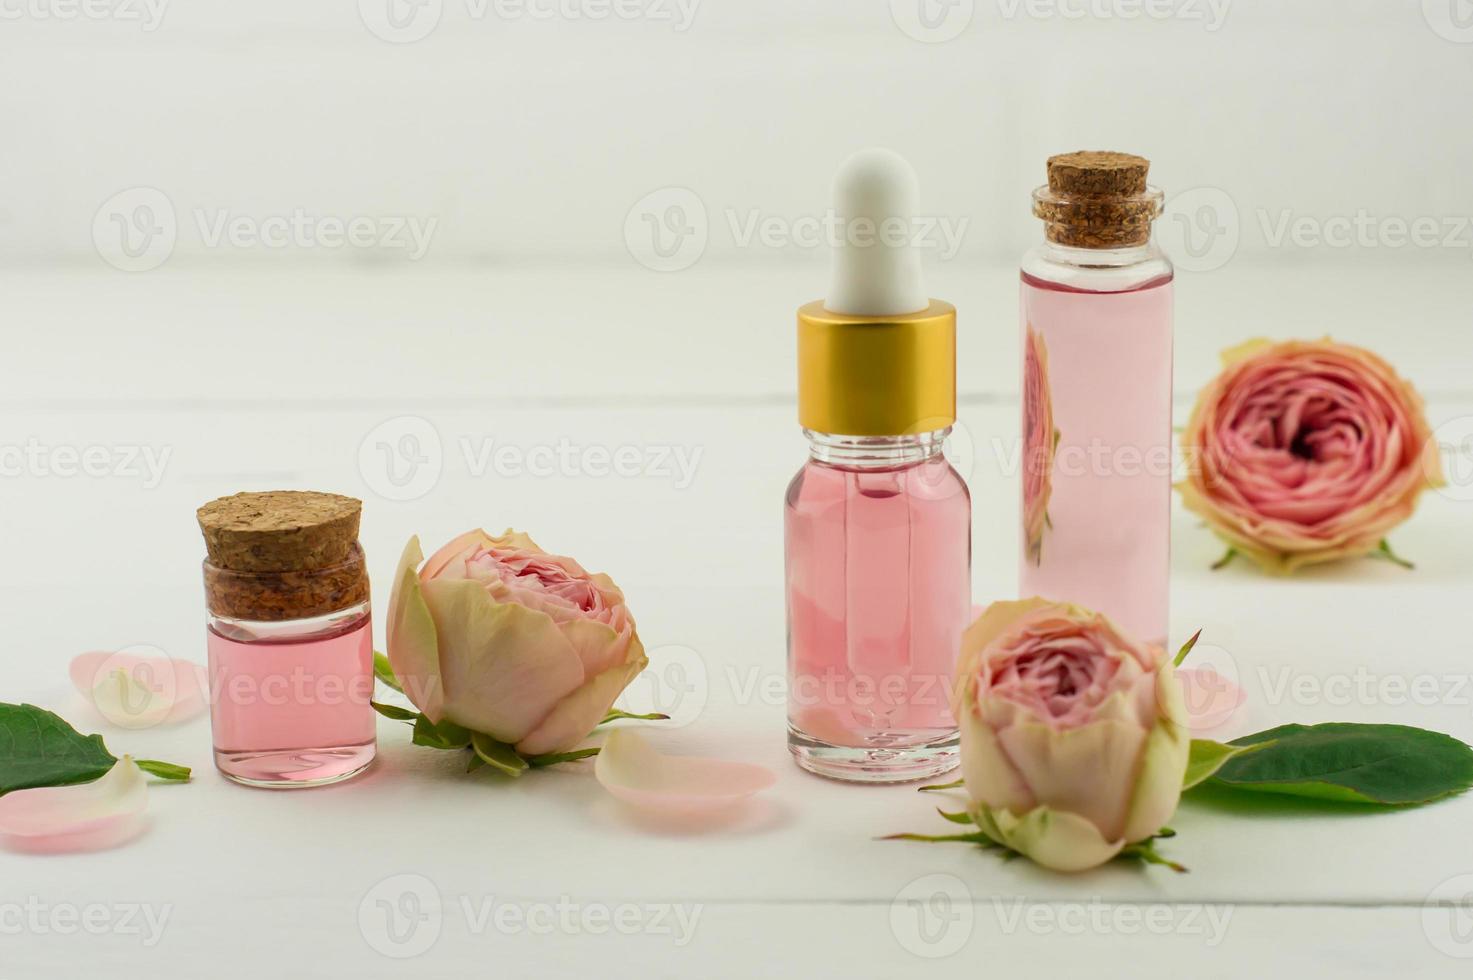 Beauty face oil made of rose flowers on white wooden background with fresh blooming flowers. Skin care face and body treatment. Aromatherapy. photo